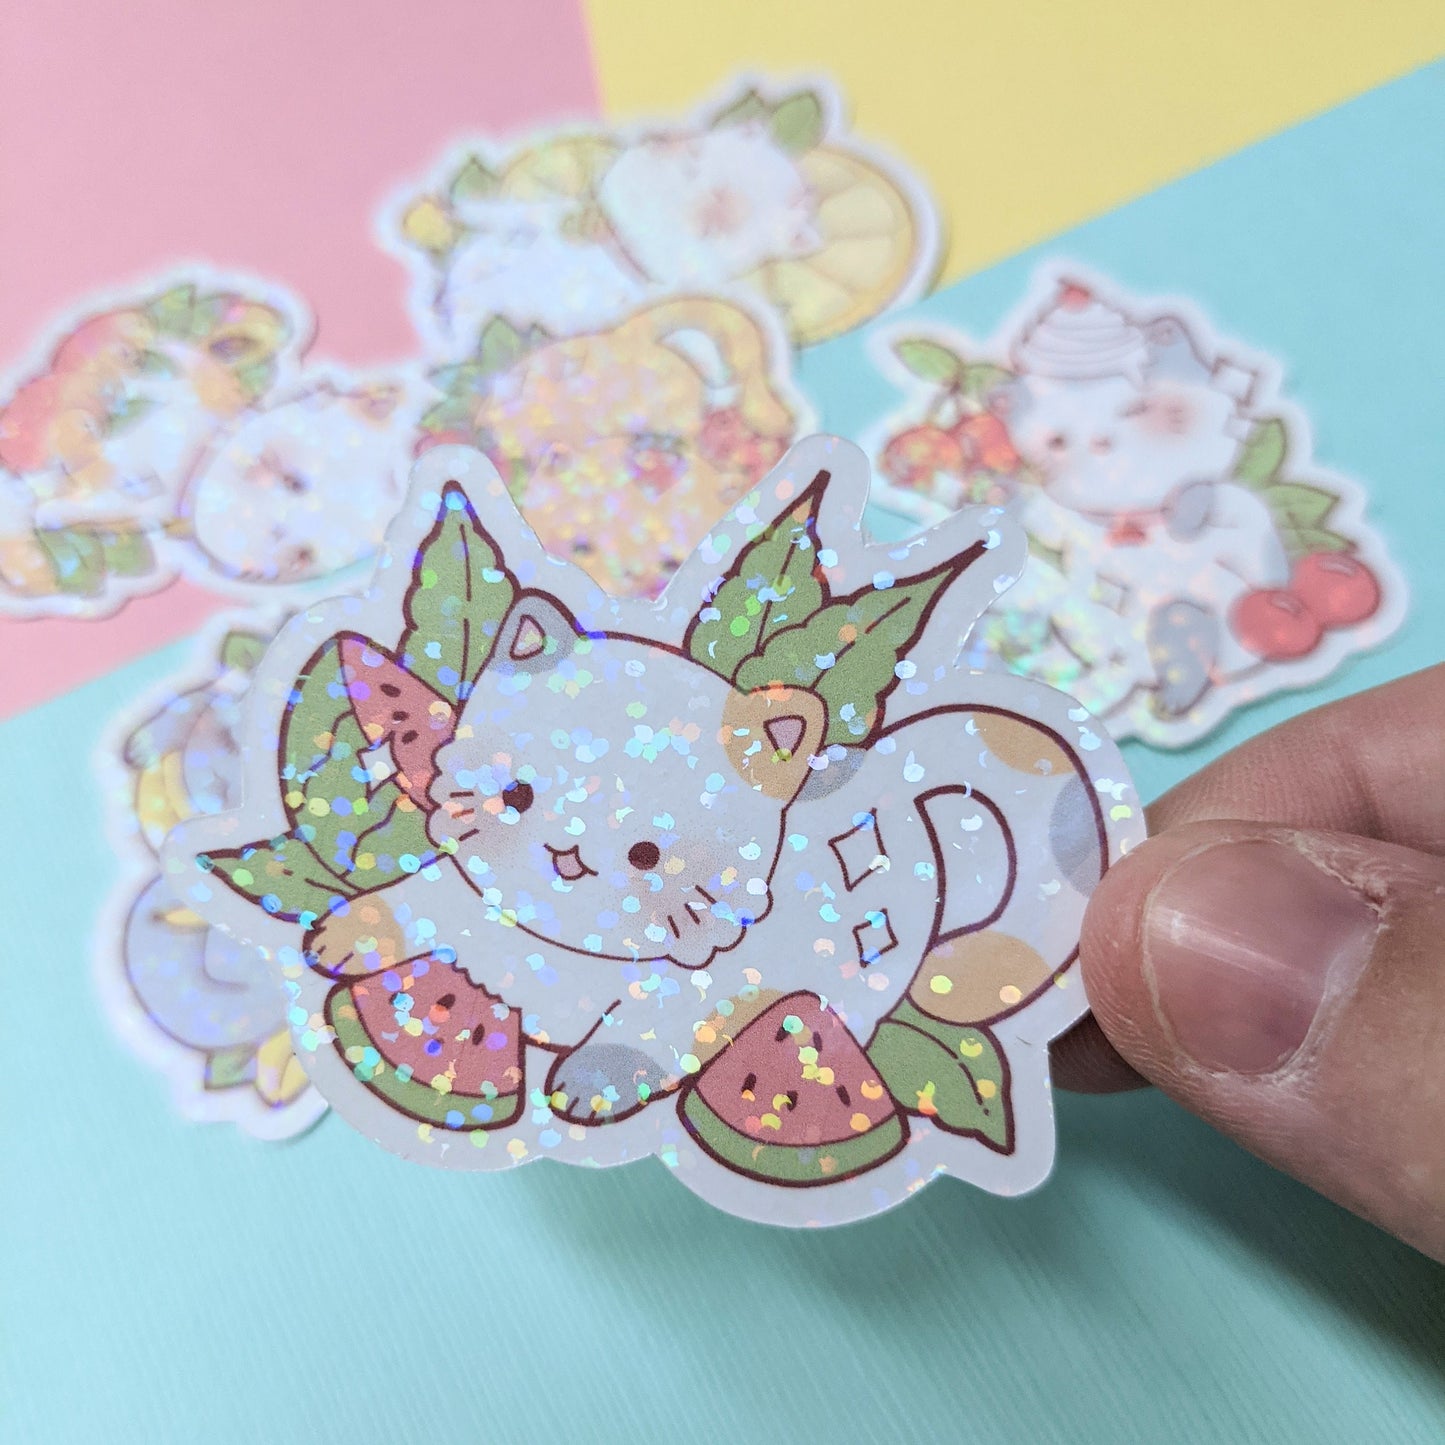 Fruit Kitties Holographic Sticker Pack (6)